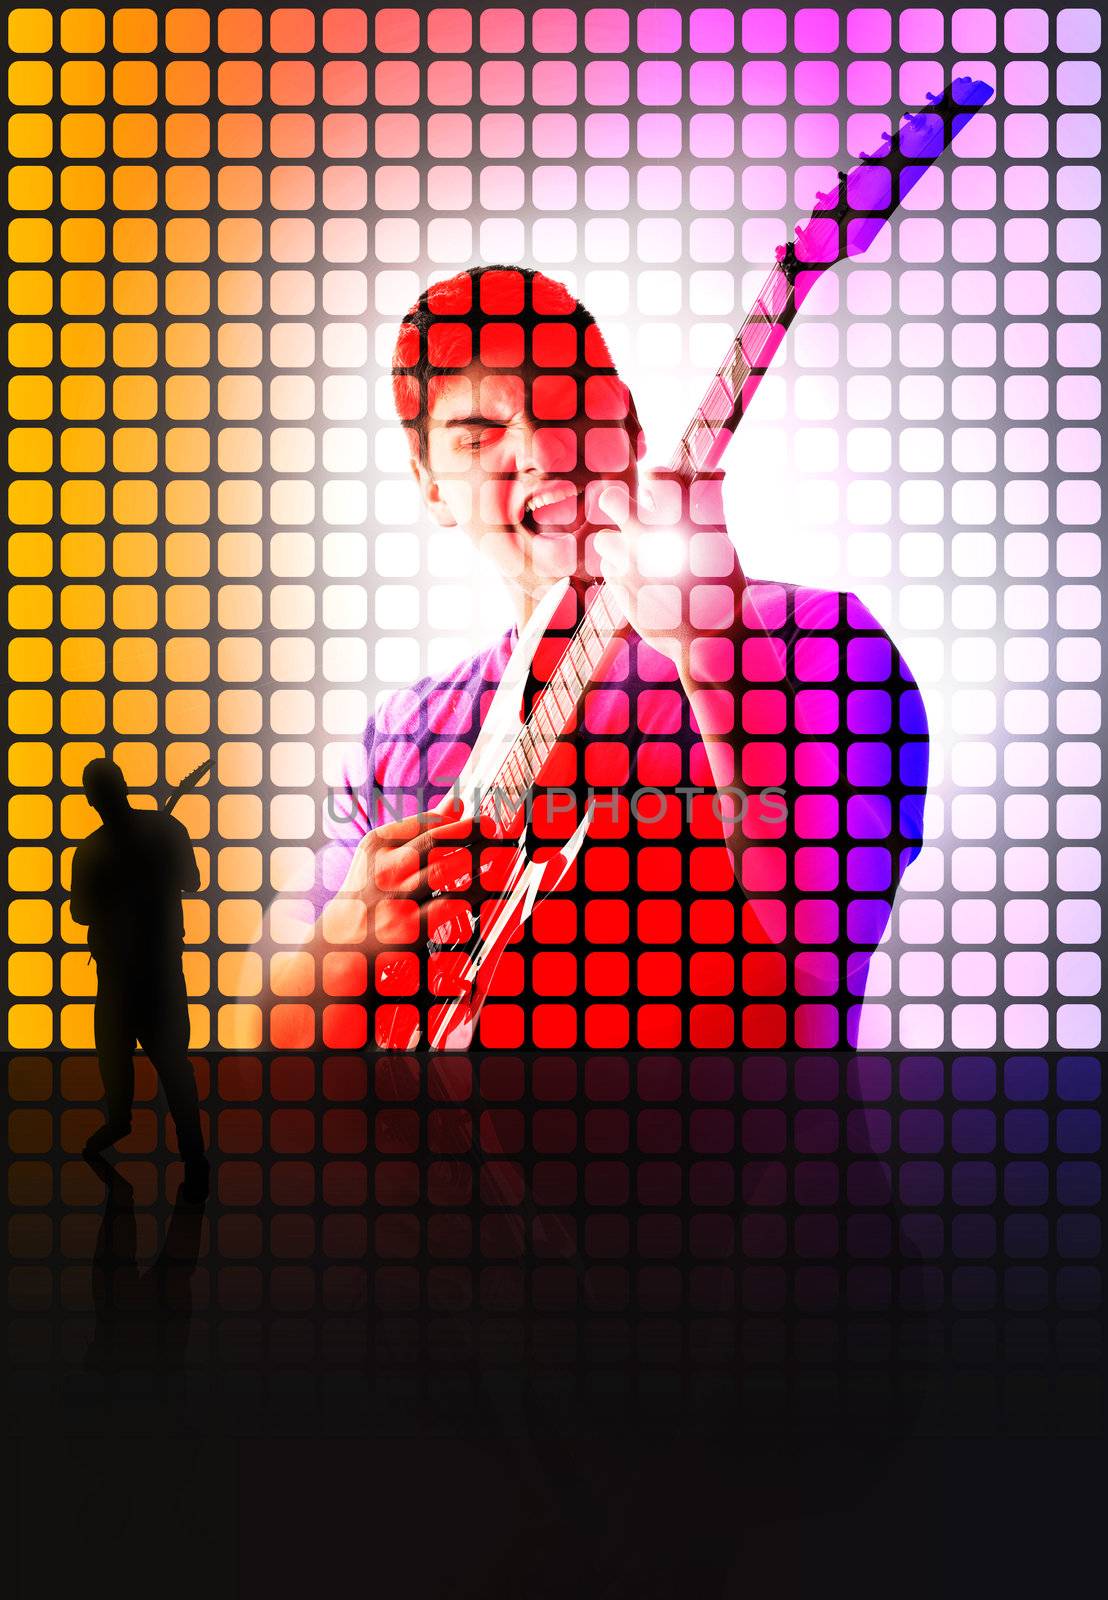 Abstract illustration of a backlit guitar player standing in front of a screen of himself while playing on stage.